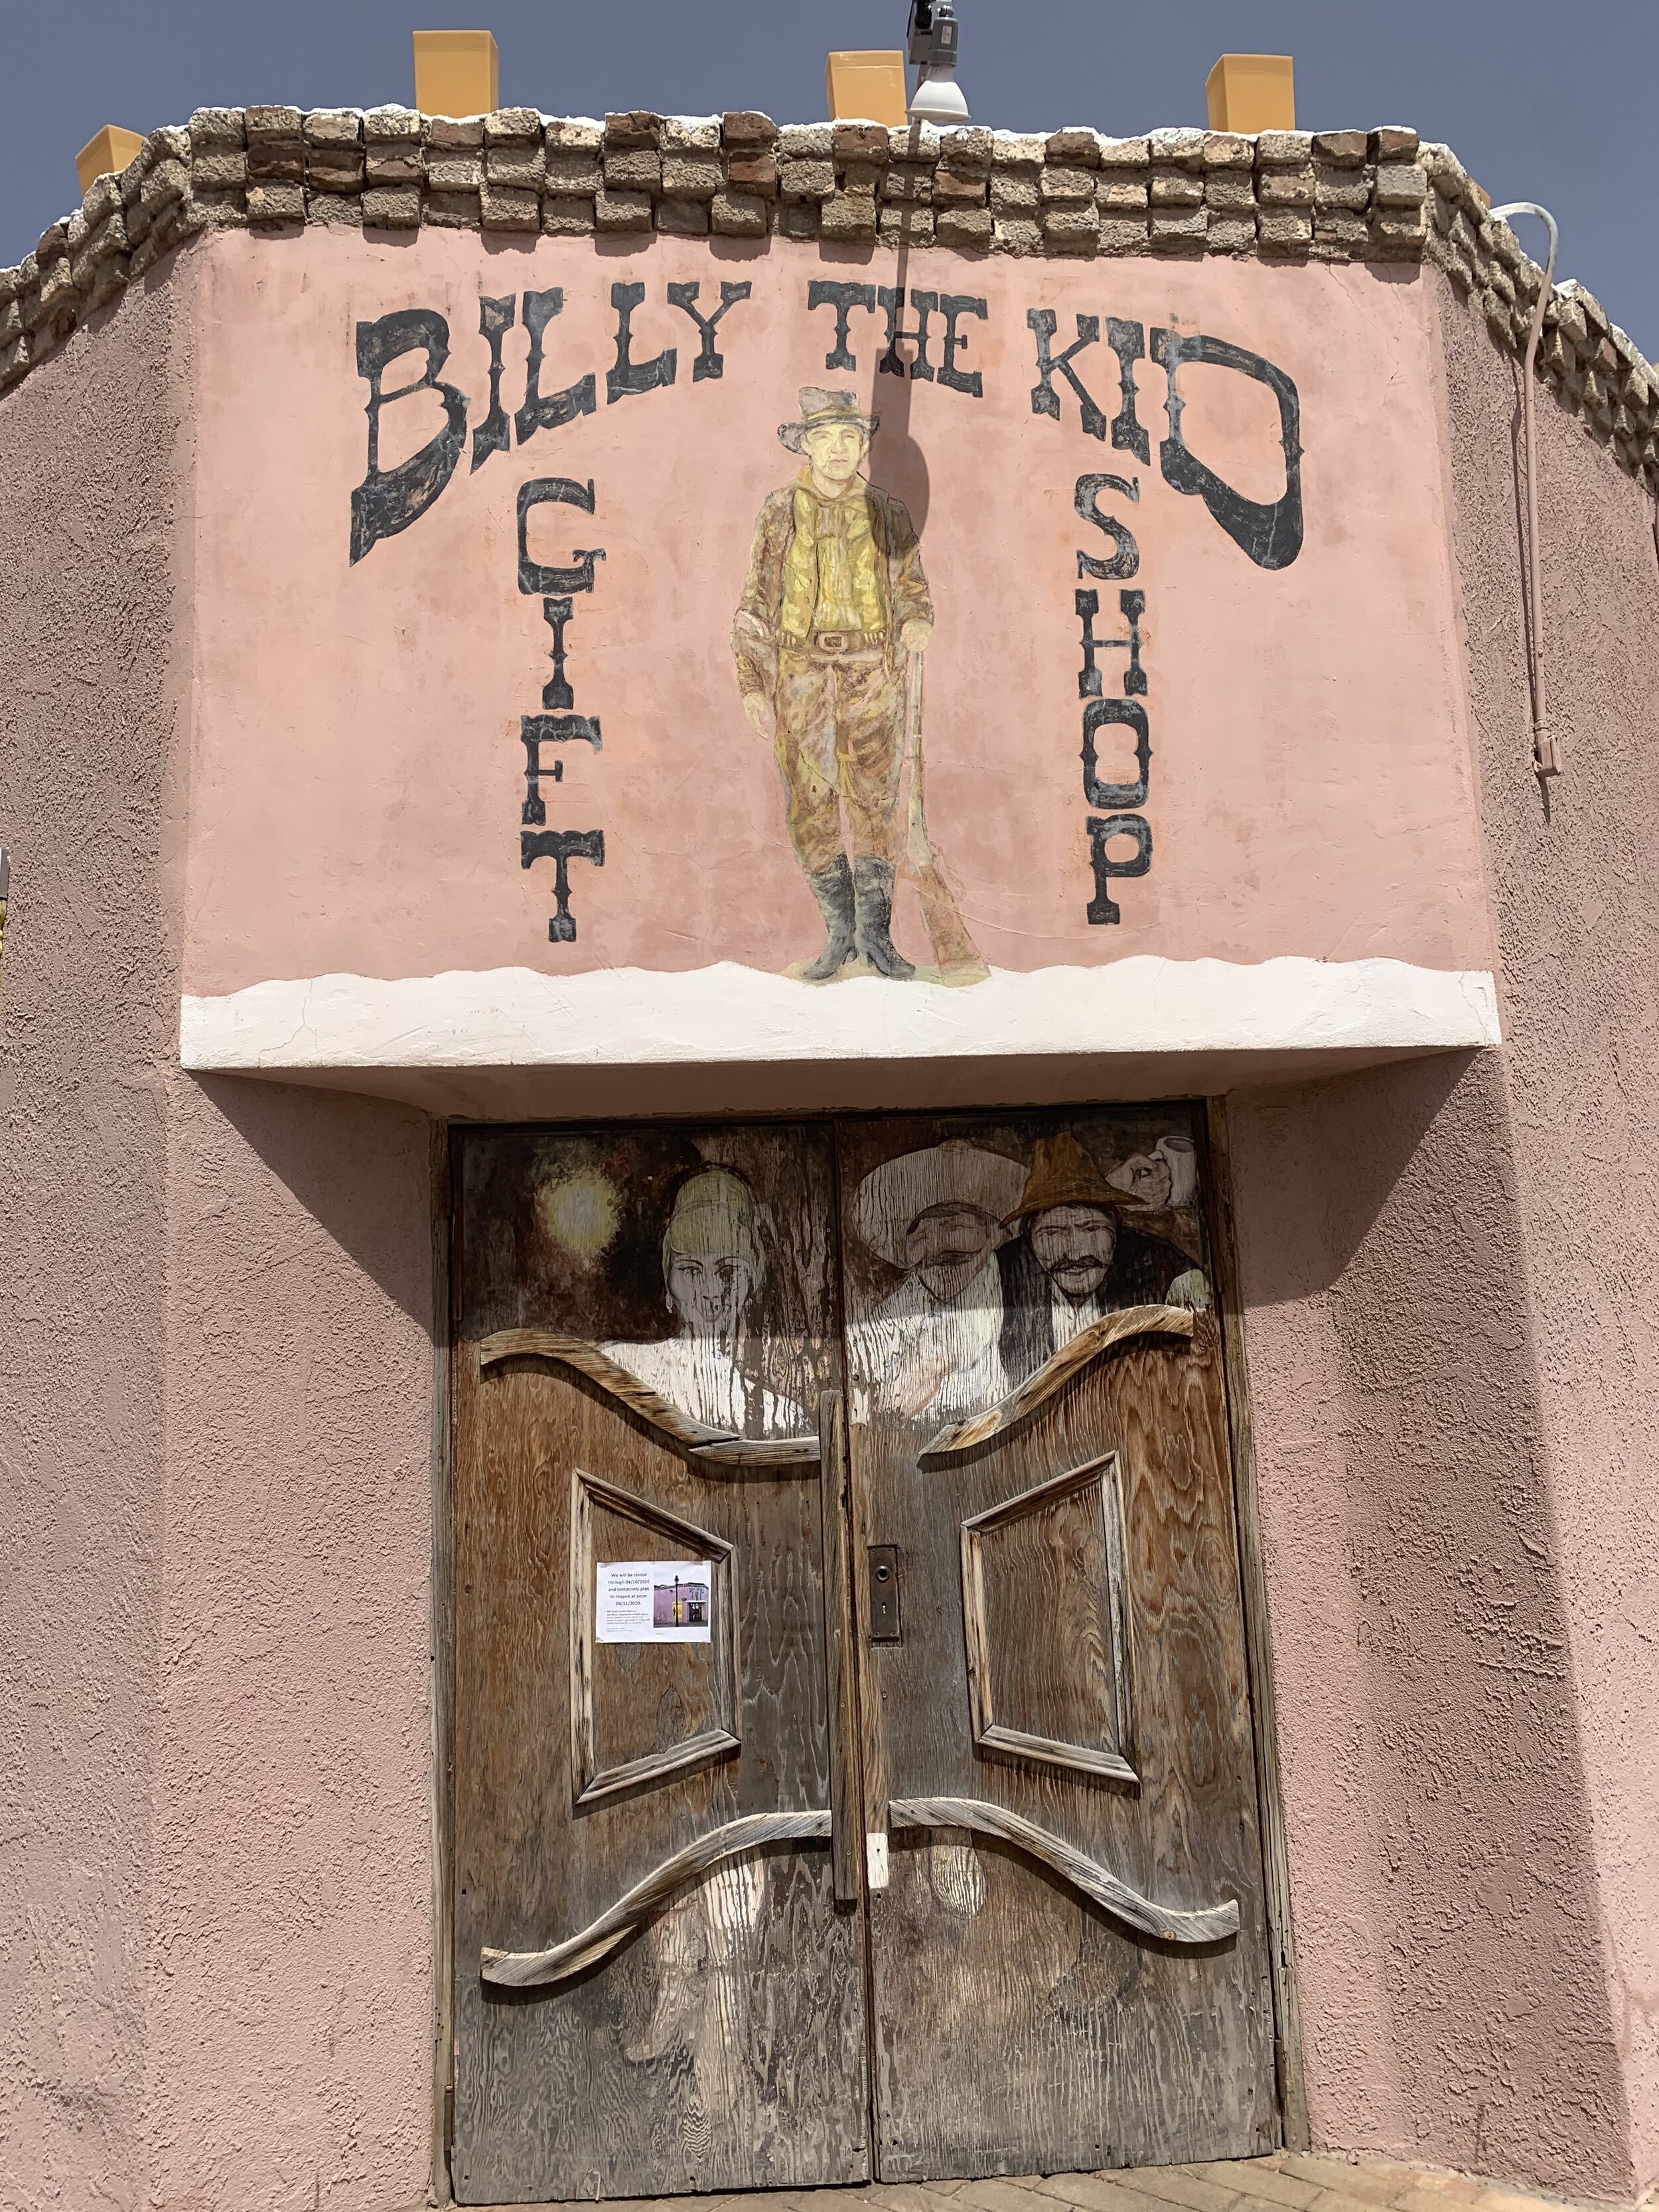  This building in Mesilla is where William McCarty, aka  Billy the Kid  was tried, convicted of murder, and was sentenced to hang. Before he was hanged, he escaped from jail, killing two sheriff's deputies, and evading capture for more than two month